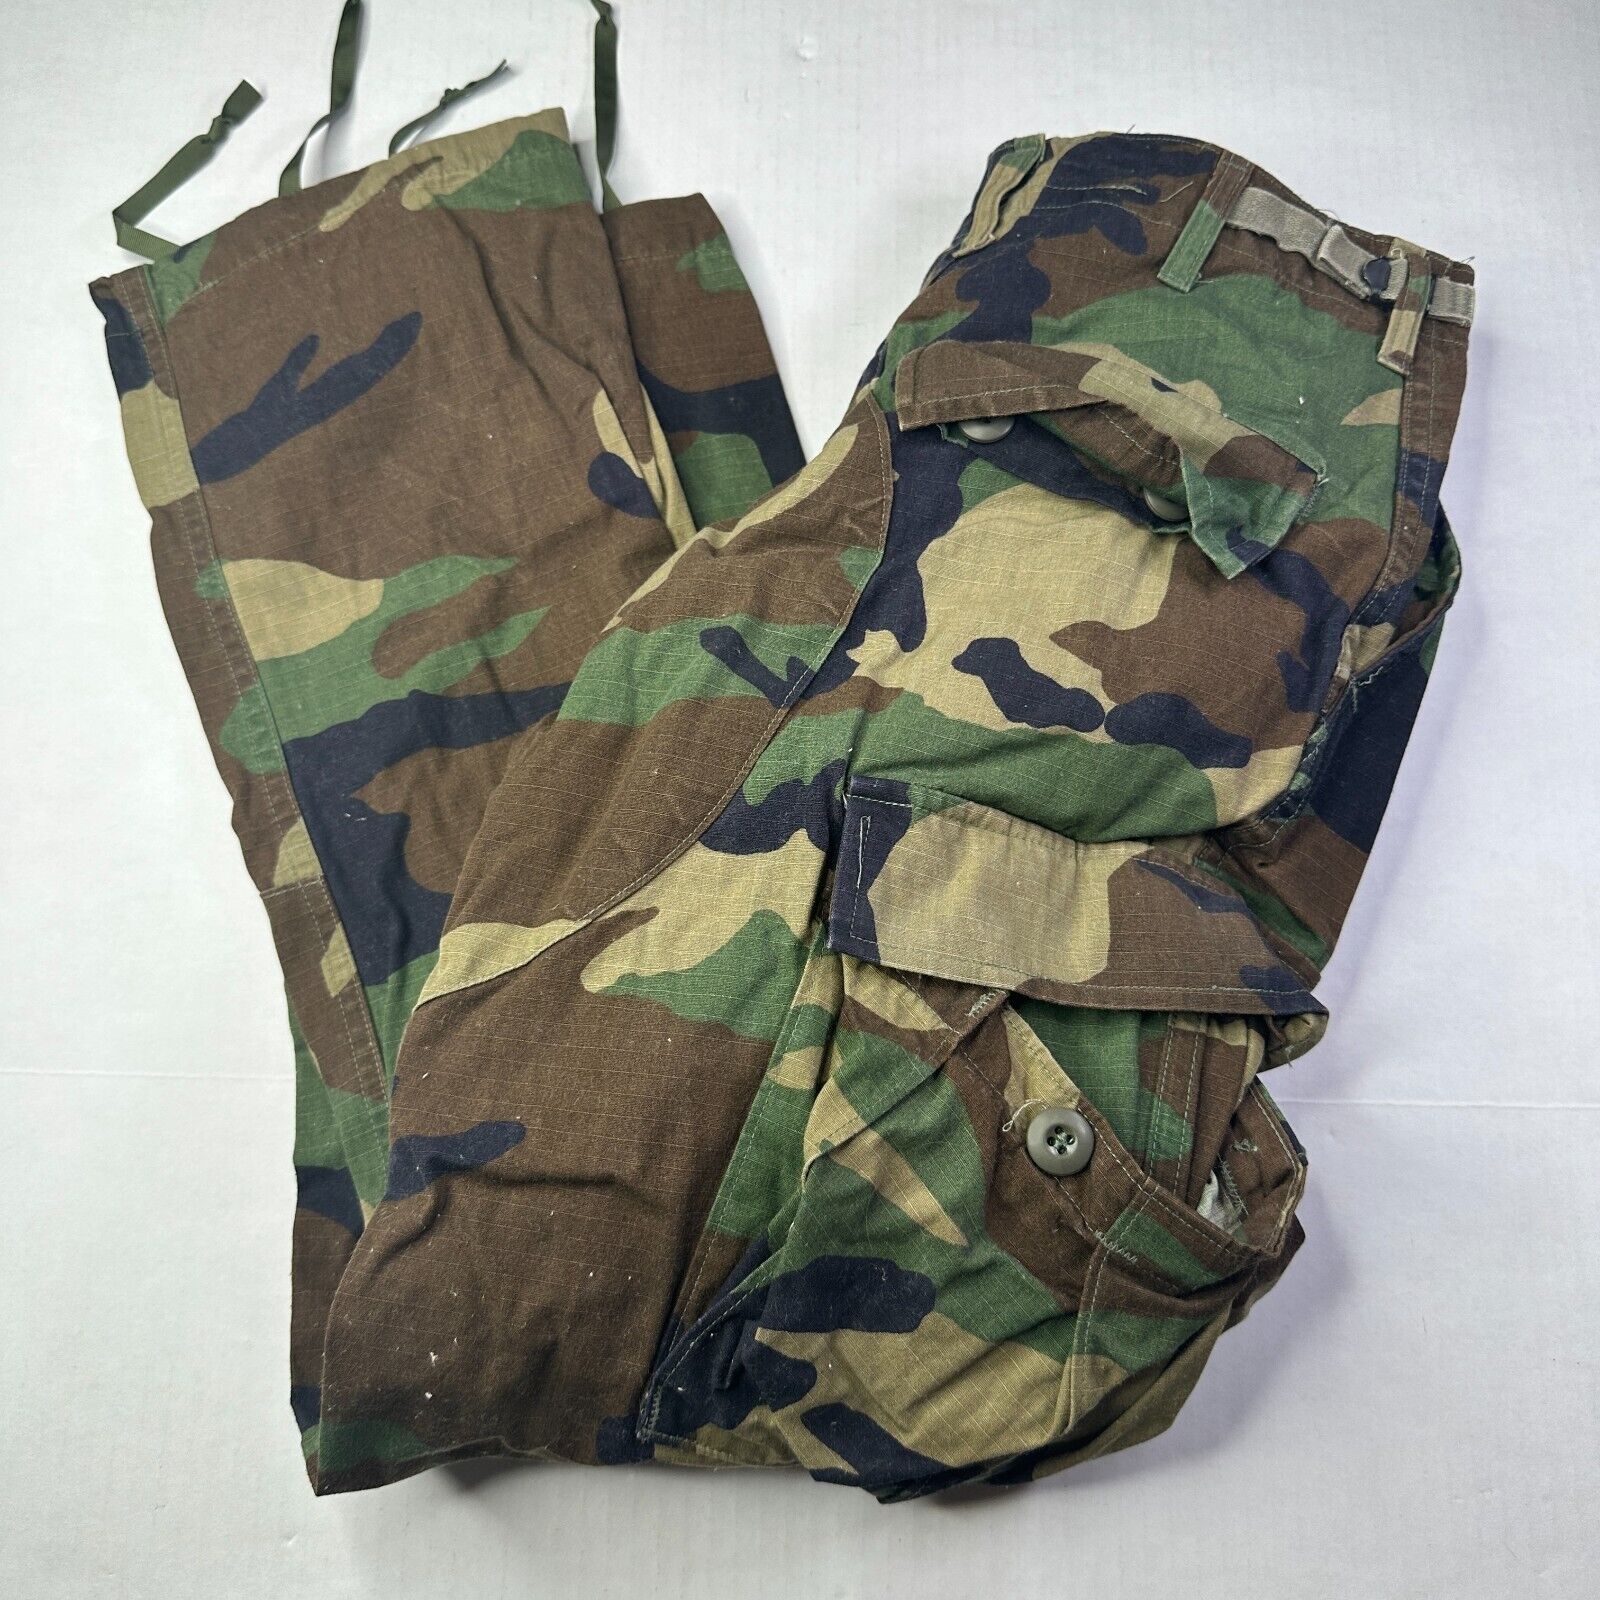 US Military Camo Cargo Pants Size X-Small Short 8415-01-390-8556